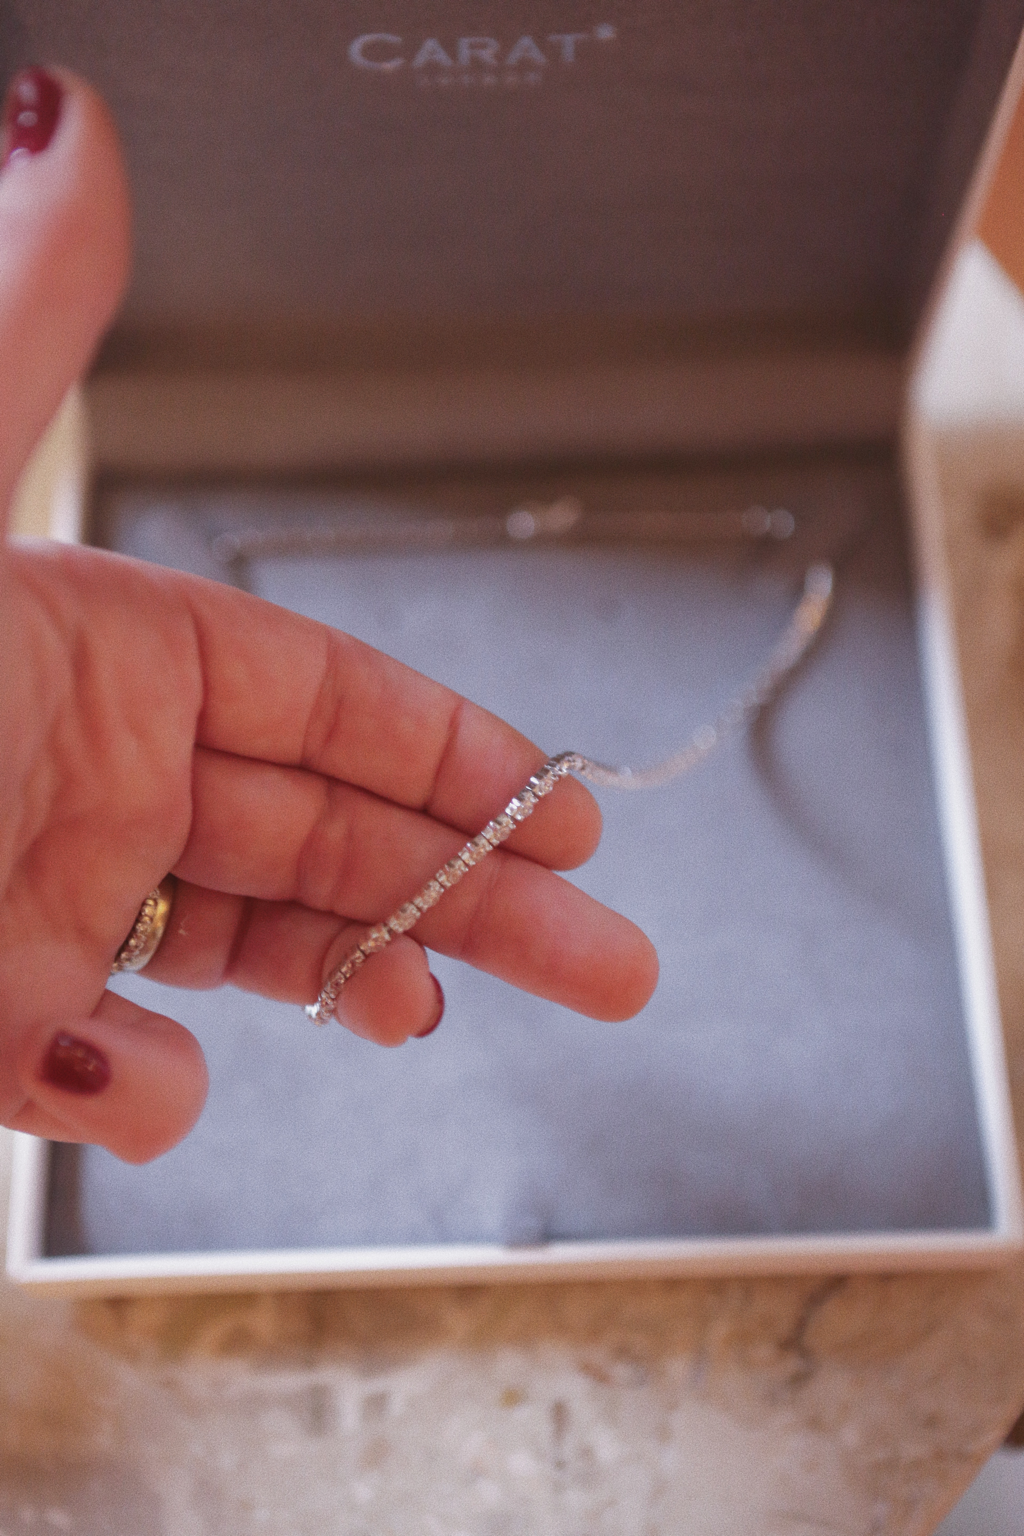 5 Editing Tech You Can Use for Your Jewellery Business